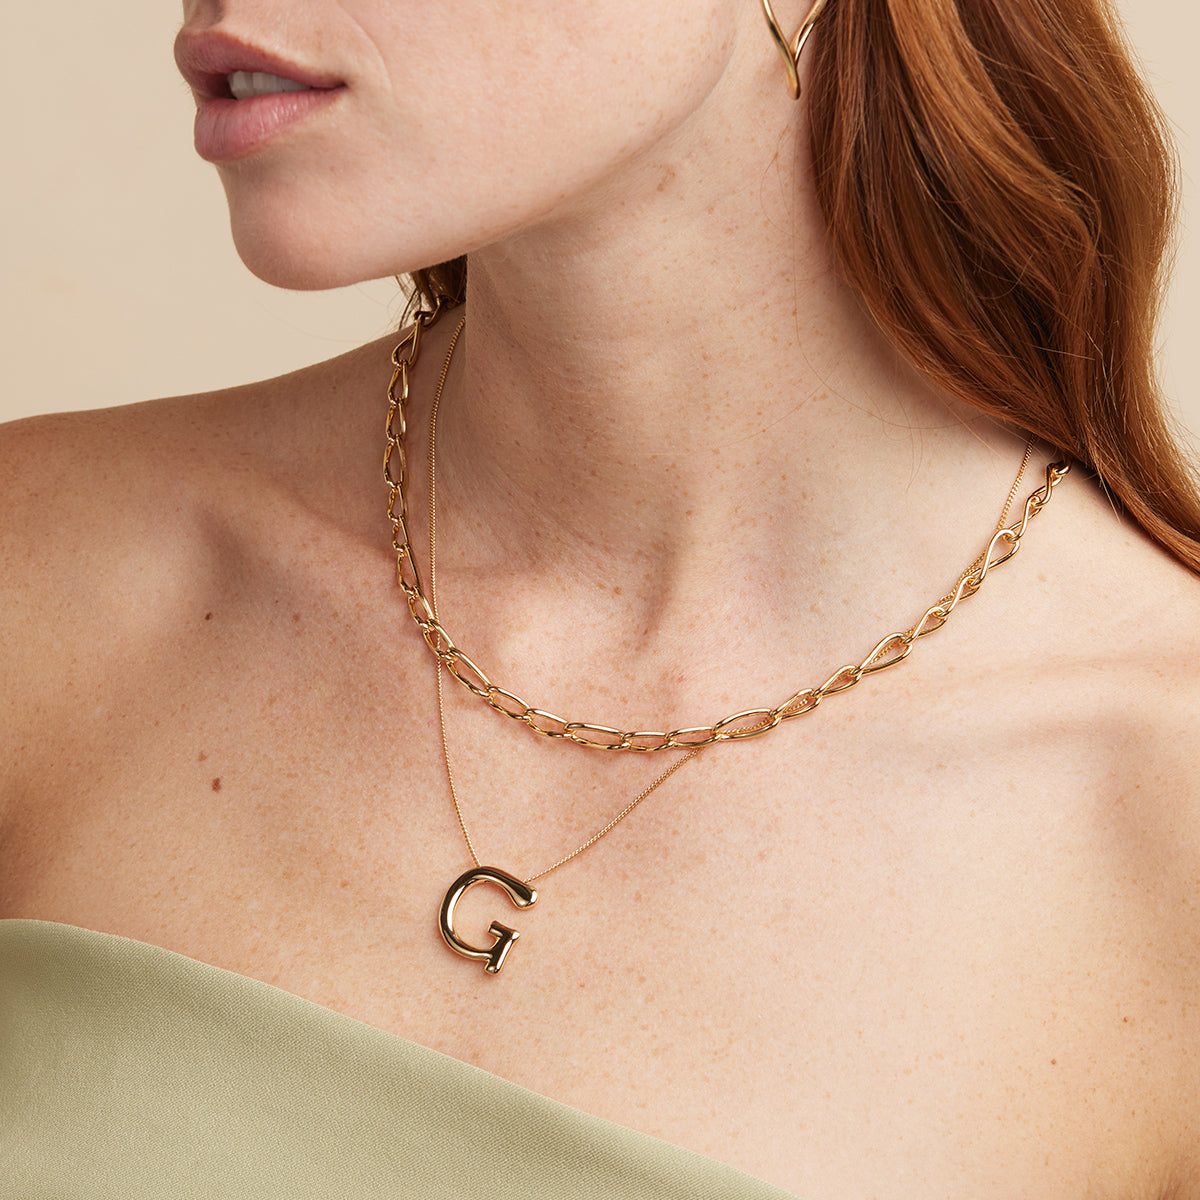 Infinite Chain Necklace in Gold